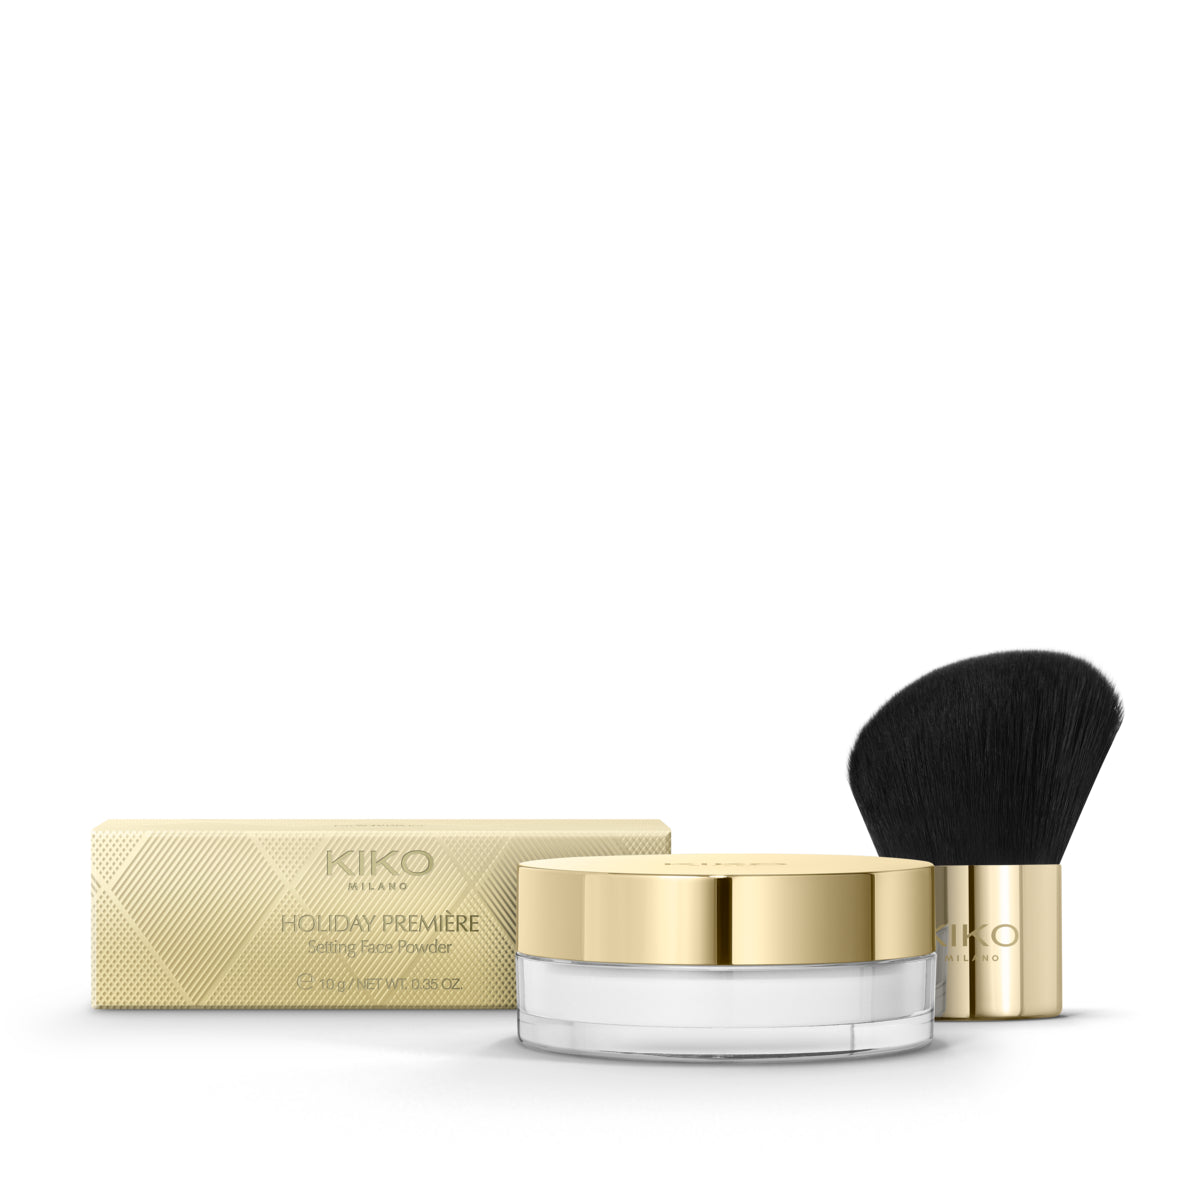 Holiday Premiere Setting Face Powder